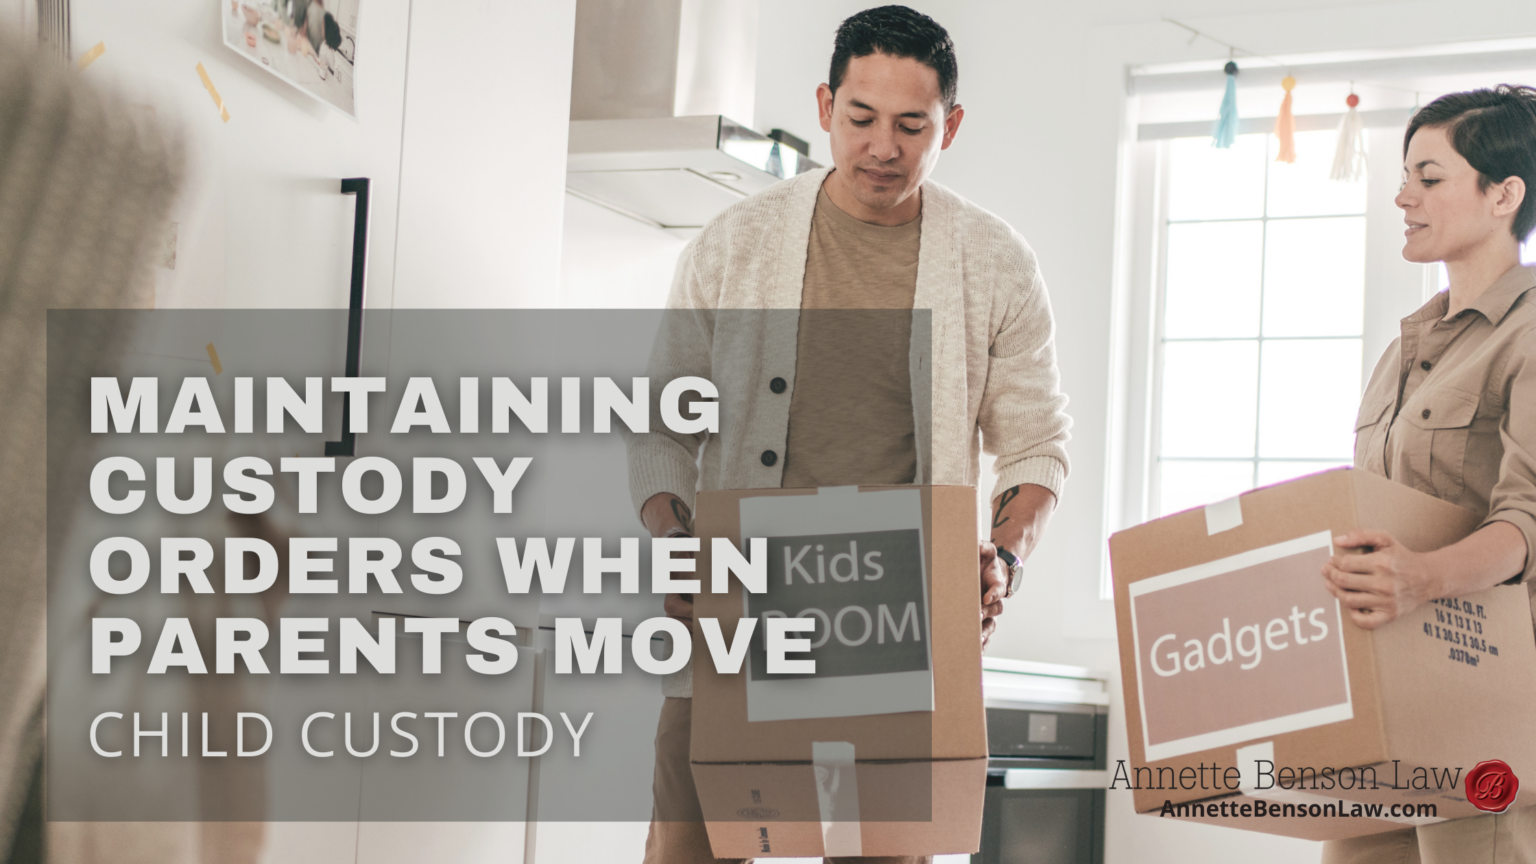 Maintaining custody orders when parents move